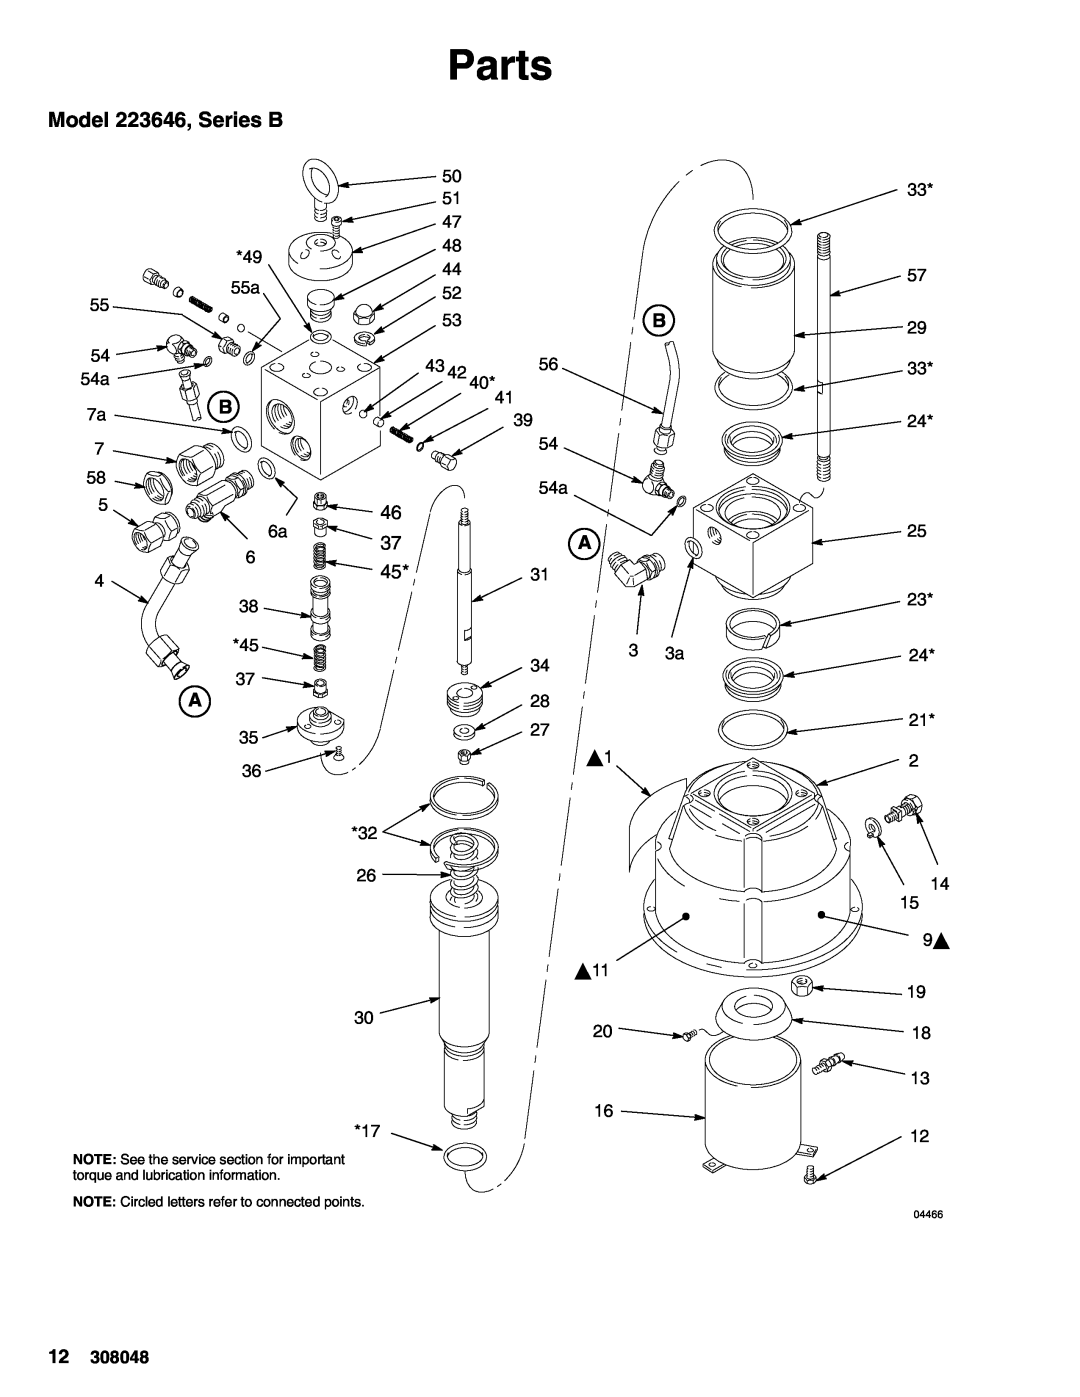 Graco Parts, Model 223646, Series B, 45*31, NOTE Circled letters refer to connected points, 04466 